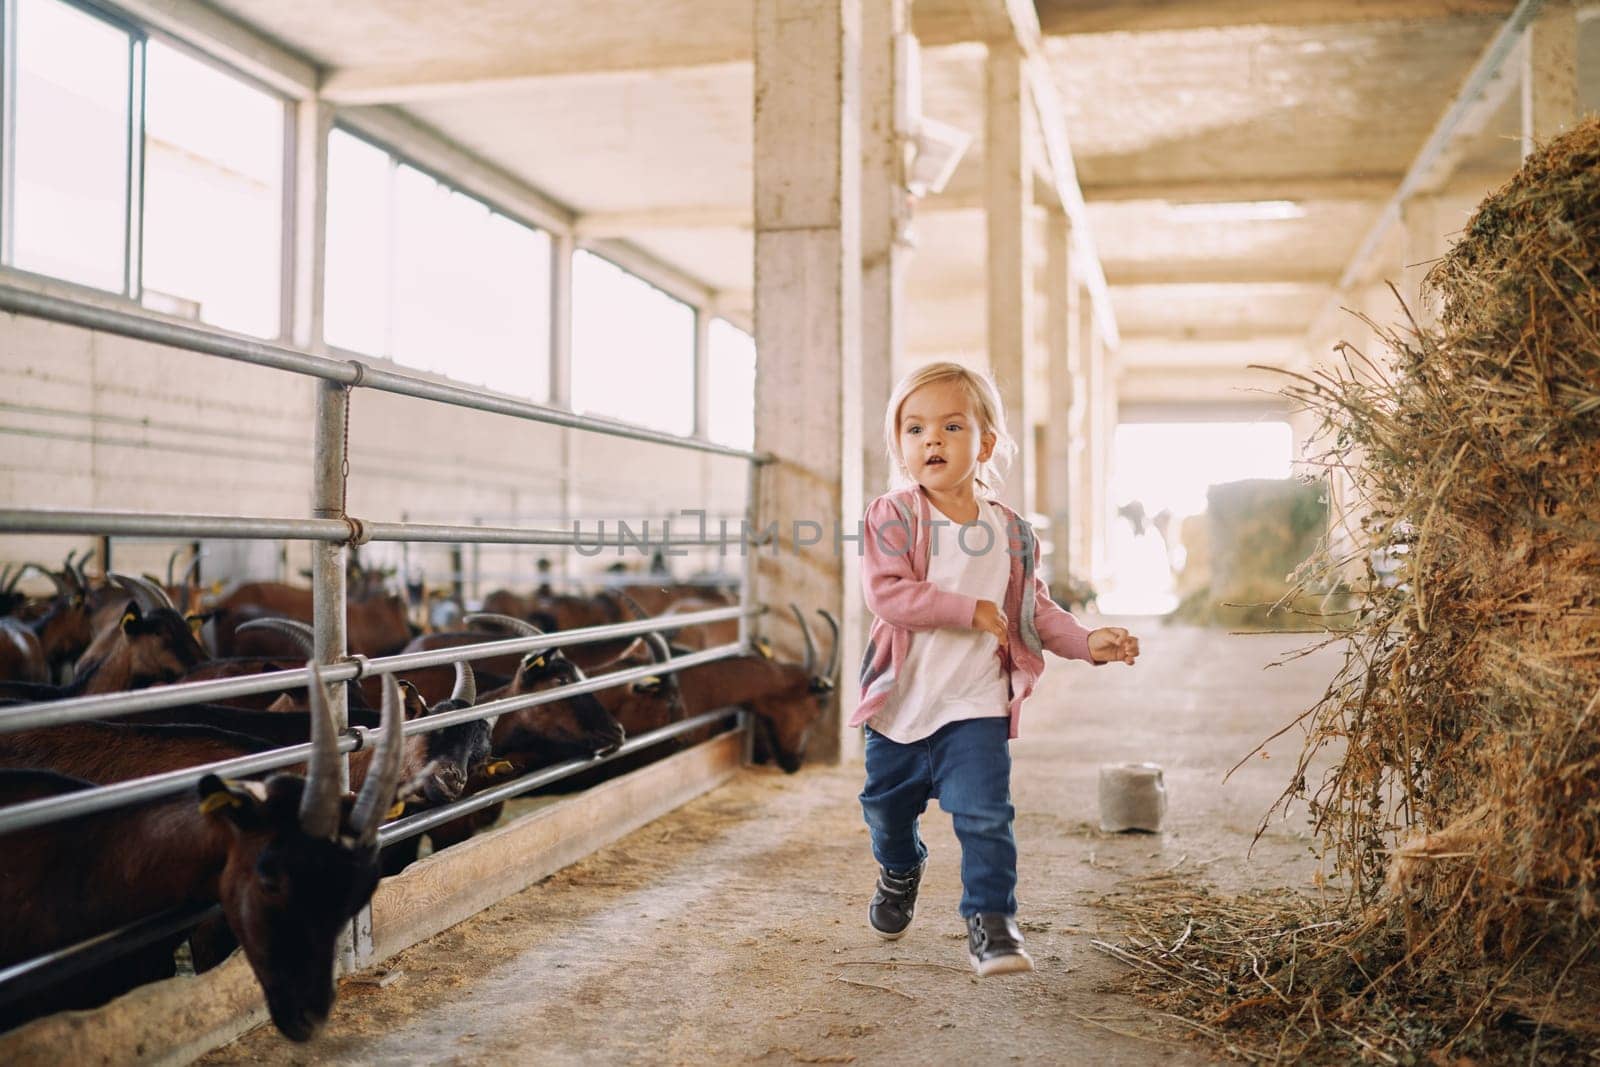 Little girl runs through the farm between rows of goat pens by Nadtochiy